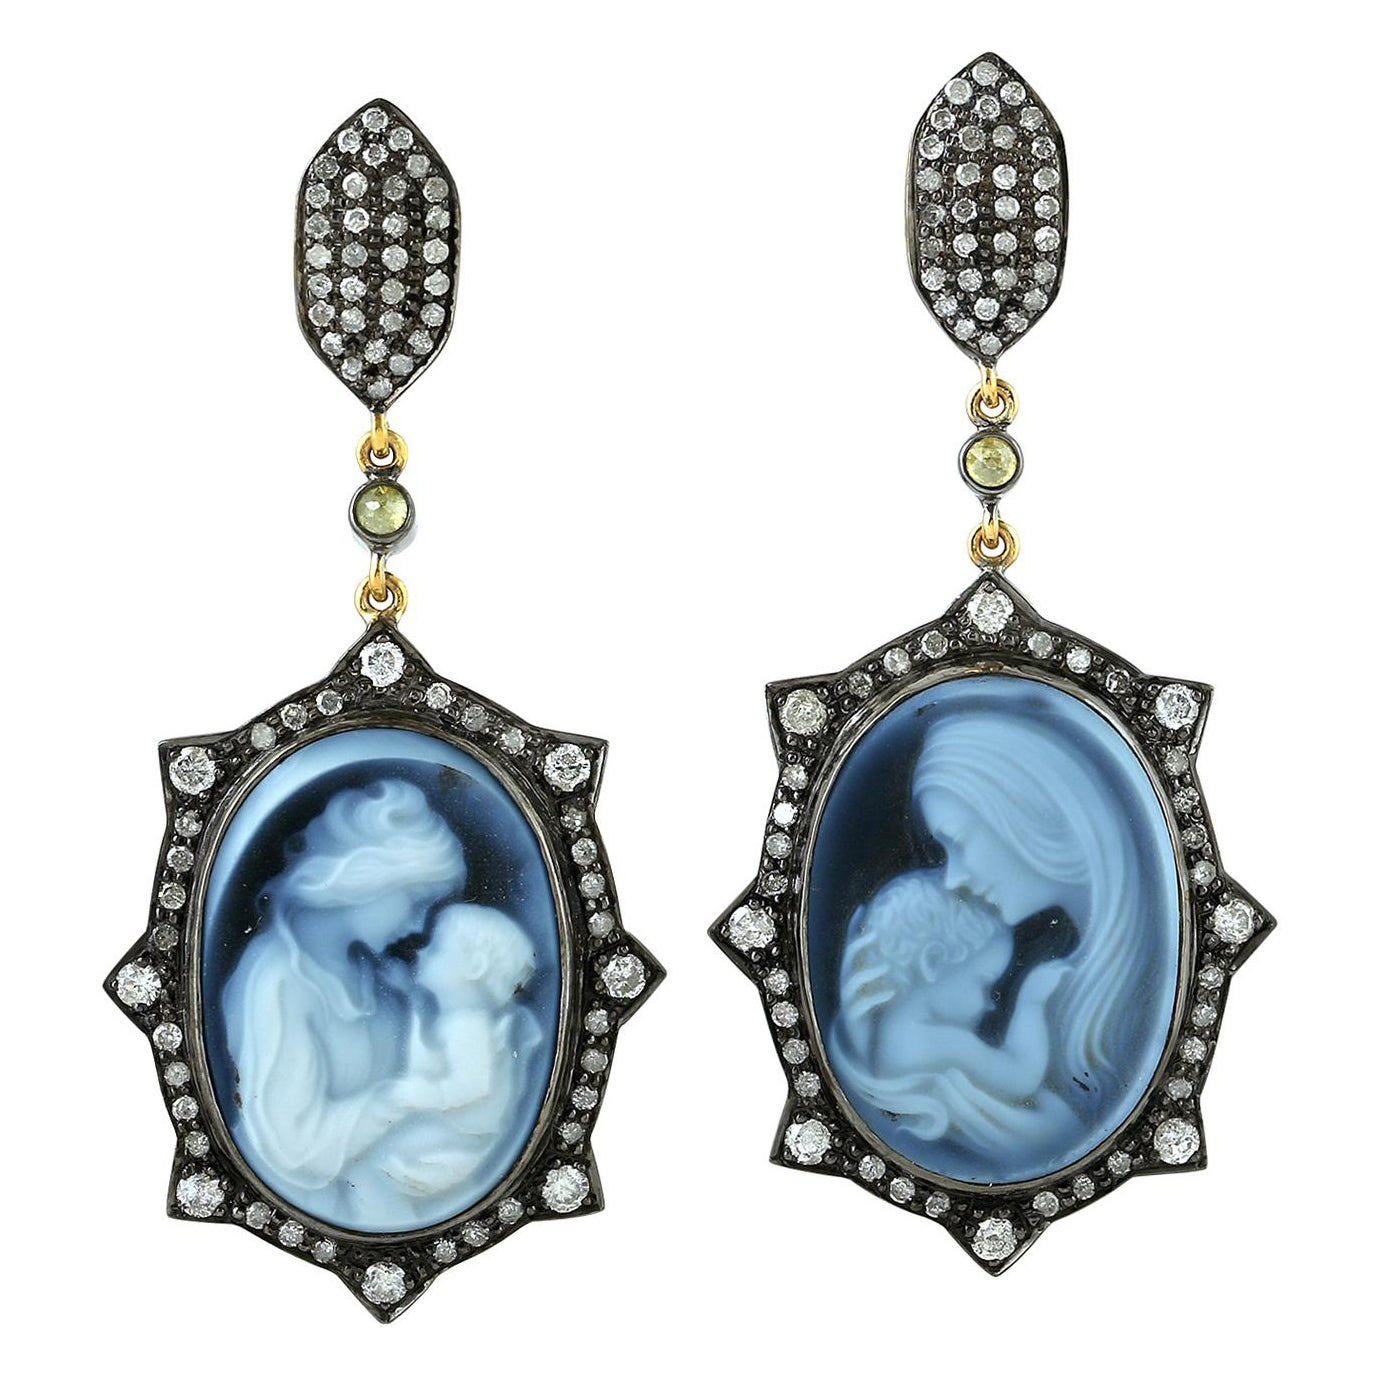 Carved Agate Cameo Surrounded by Pave Diamonds Made in 18k Yellow Gold & Silver